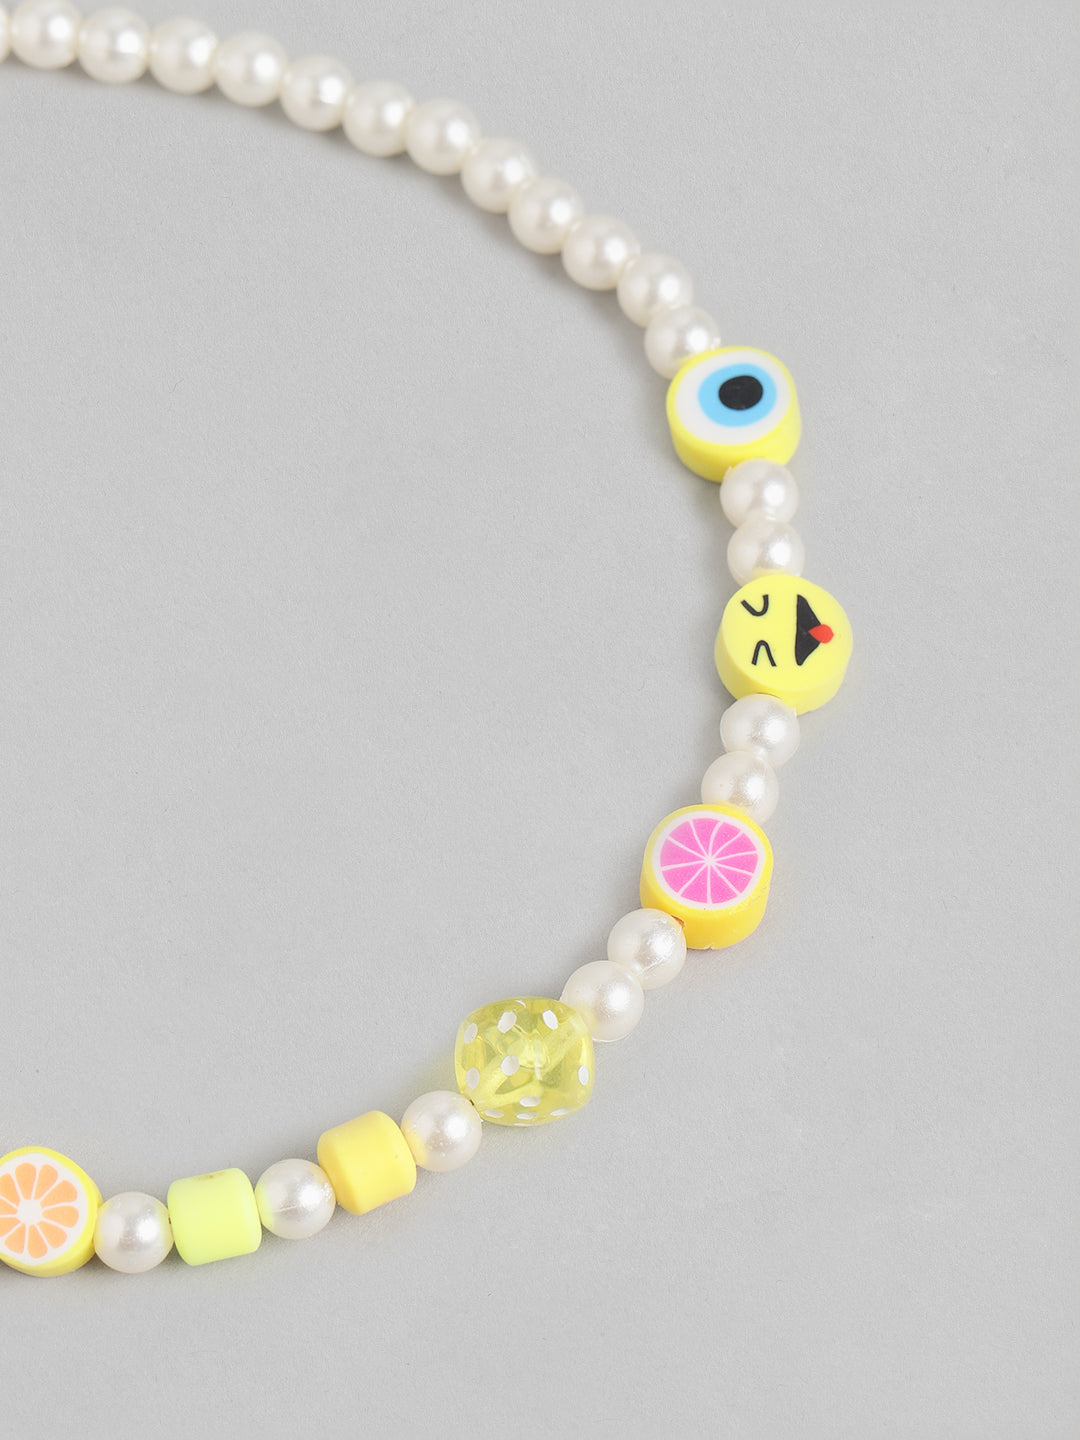 SMILEY FACE NECKLACE Beaded Choker With Pearl Smiley Face and Pearl Necklace  Beaded Choker Necklace for Women - Etsy | Beaded jewelry, Beaded choker  necklace, Real pearl necklace